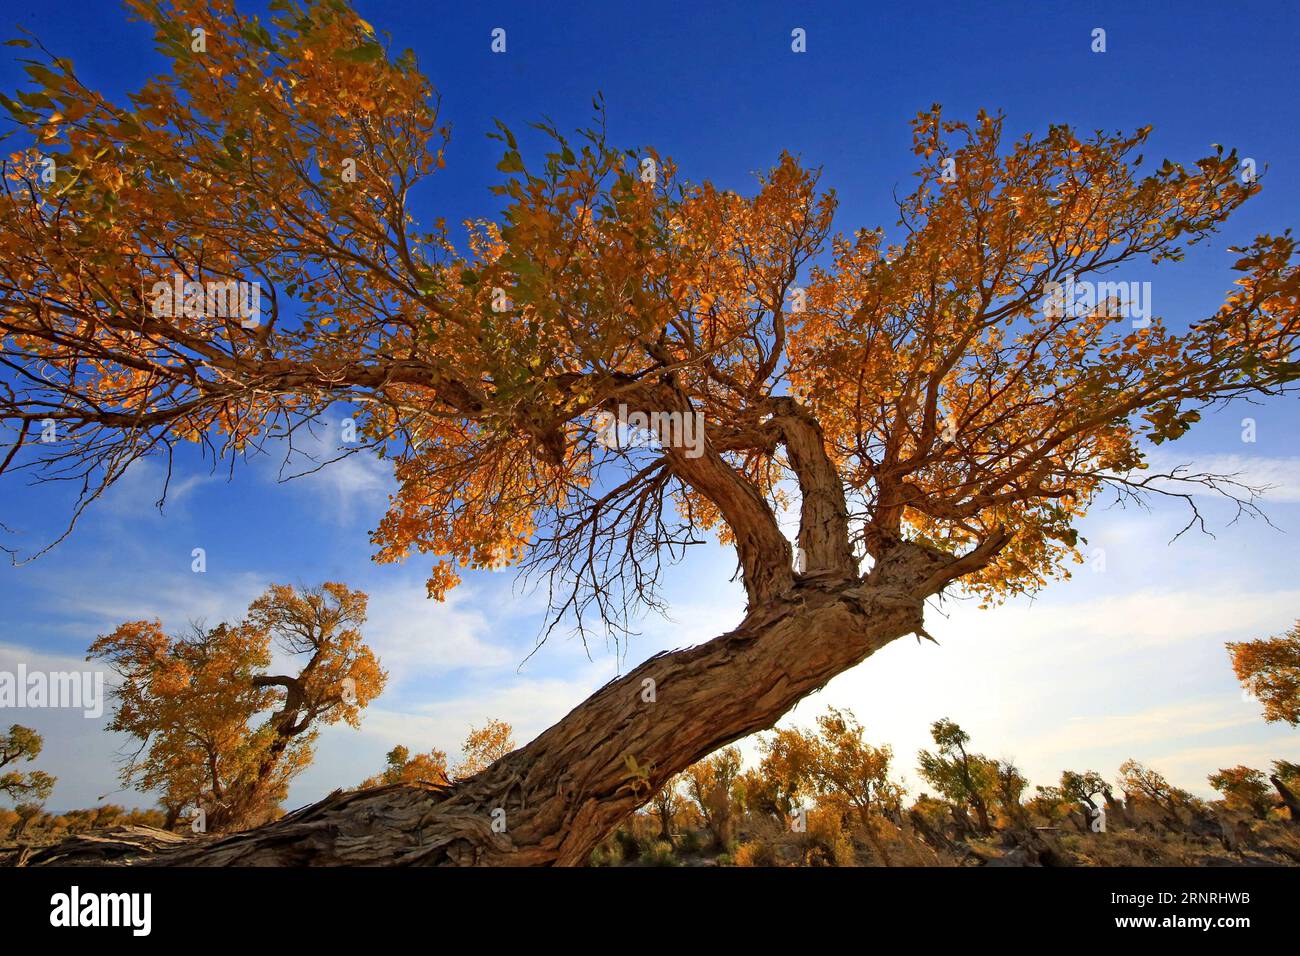 (171003) -- YIWU, Oct. 3, 2017 -- Populus diversifolia trees are seen at Yiwu County of Hami, northwest China s Xinjiang Uygur Autonomous Region, Oct. 1, 2017. Autumn is the best season in China to enjoy the golden colour of the populus diversifolia trees. ) (wjq) CHINA-XINJIANG-POPULUS DIVERSIFOLIA TREE-SCENERY (CN) CaixZengle PUBLICATIONxNOTxINxCHN Stock Photo